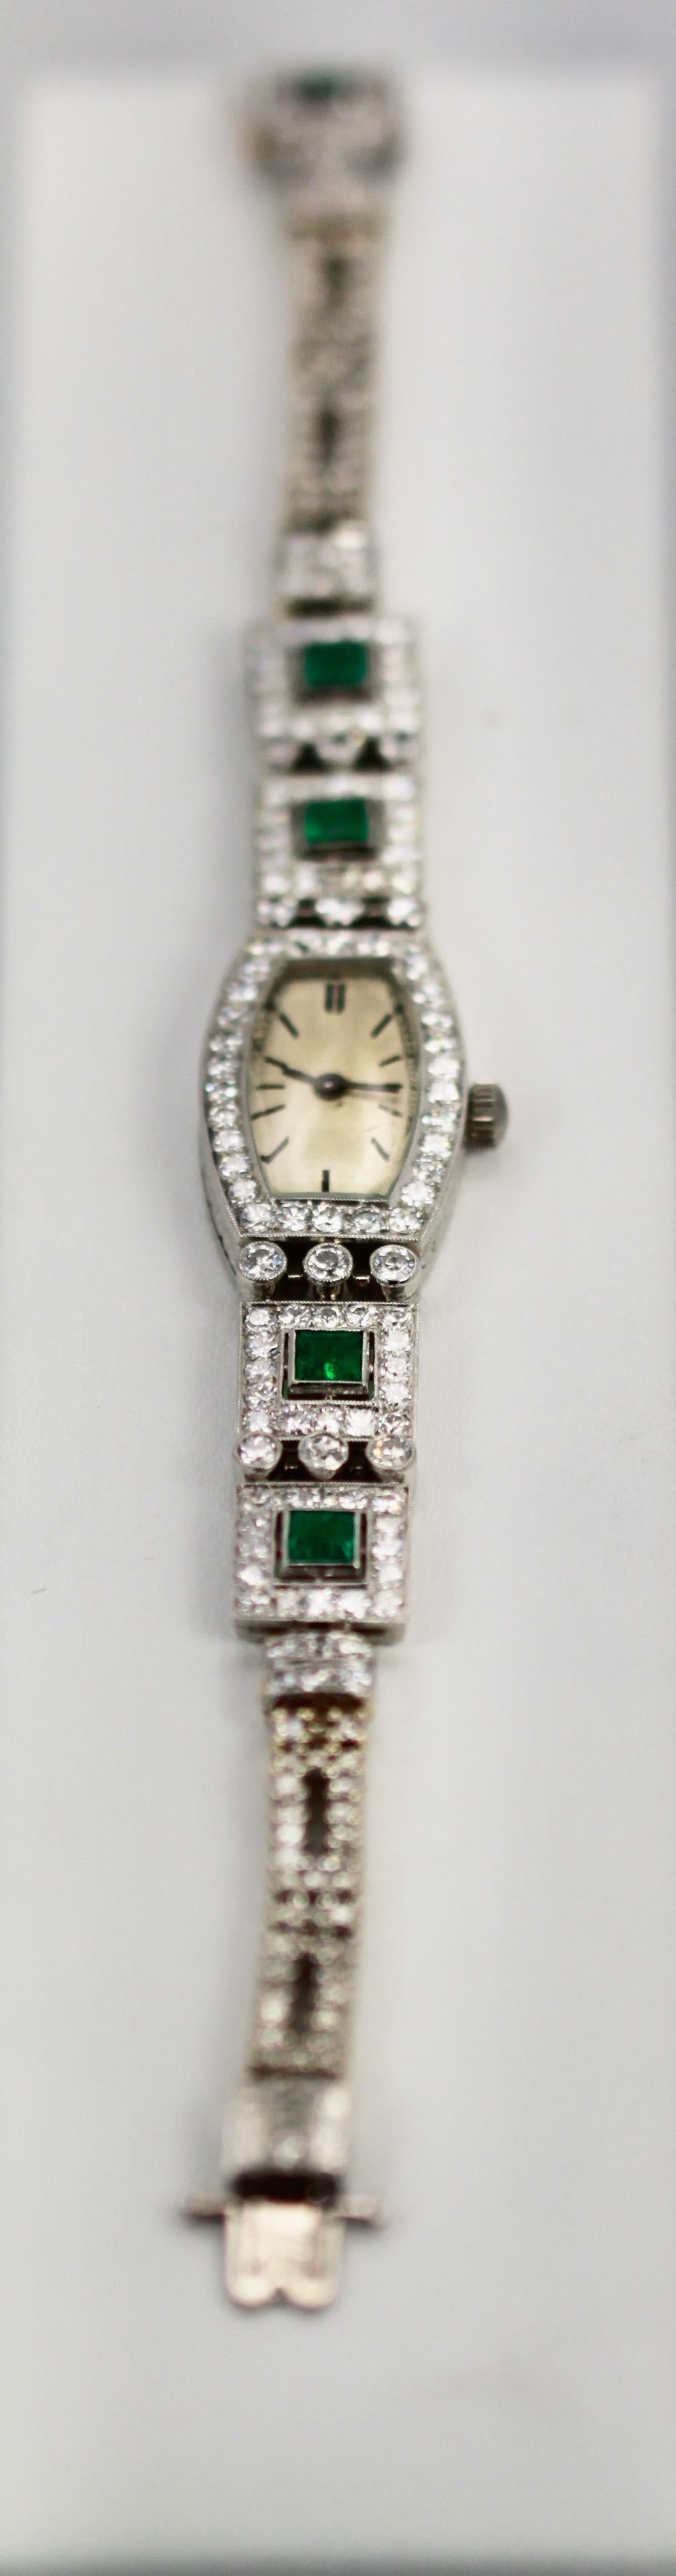 This gorgeous Deco Emerald Platinum ladies wrist watch is from the 1920's to 1930's and has Austrian Hallmarks.  I just loved the Deco and Retro periods because the watches made for ladies were all gem encrusted and made to look like bracelets. This